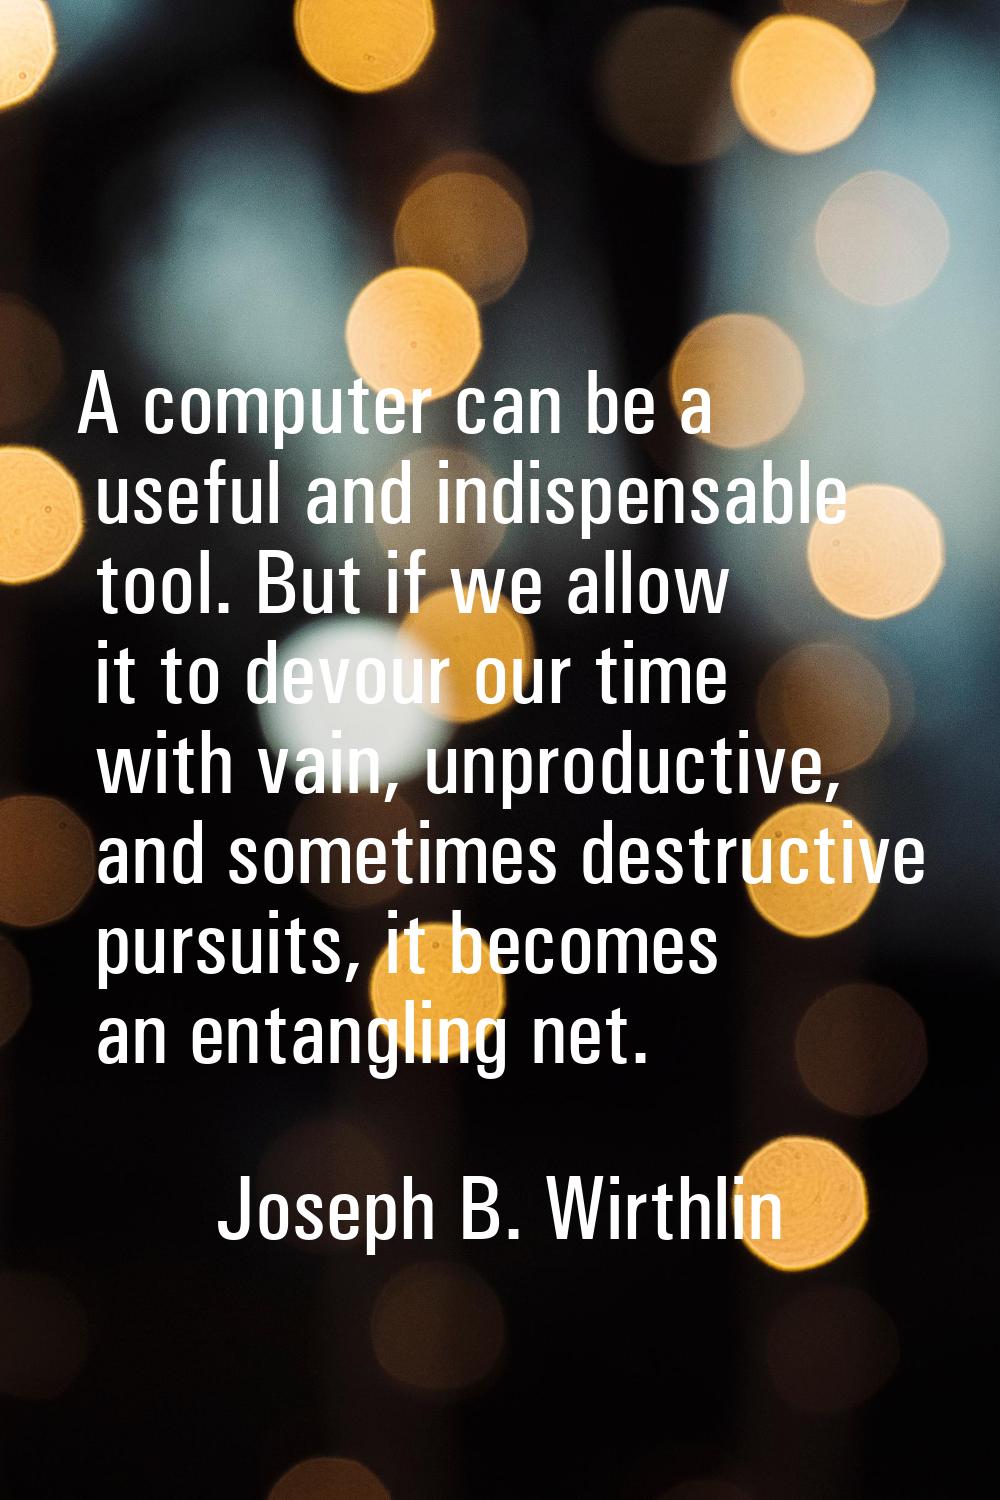 A computer can be a useful and indispensable tool. But if we allow it to devour our time with vain,